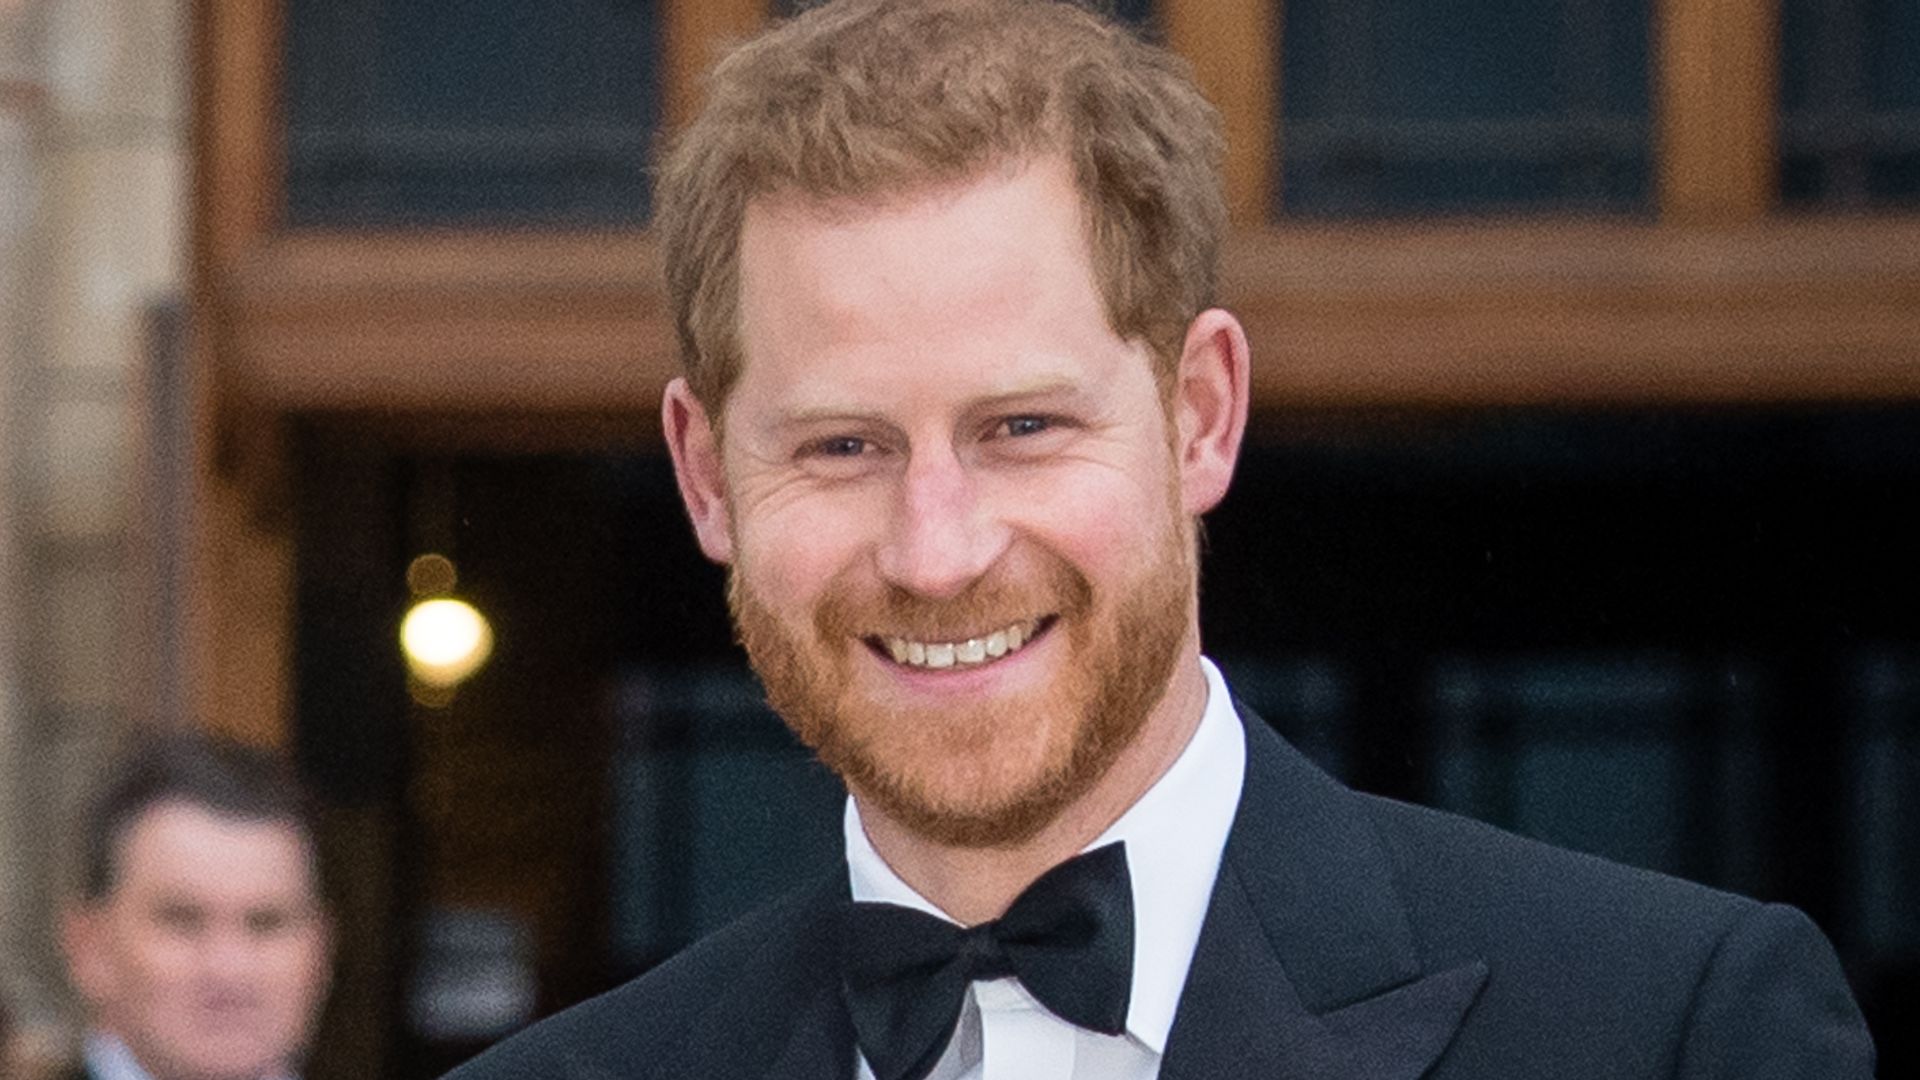 Prince Harry in a bow tie and suit